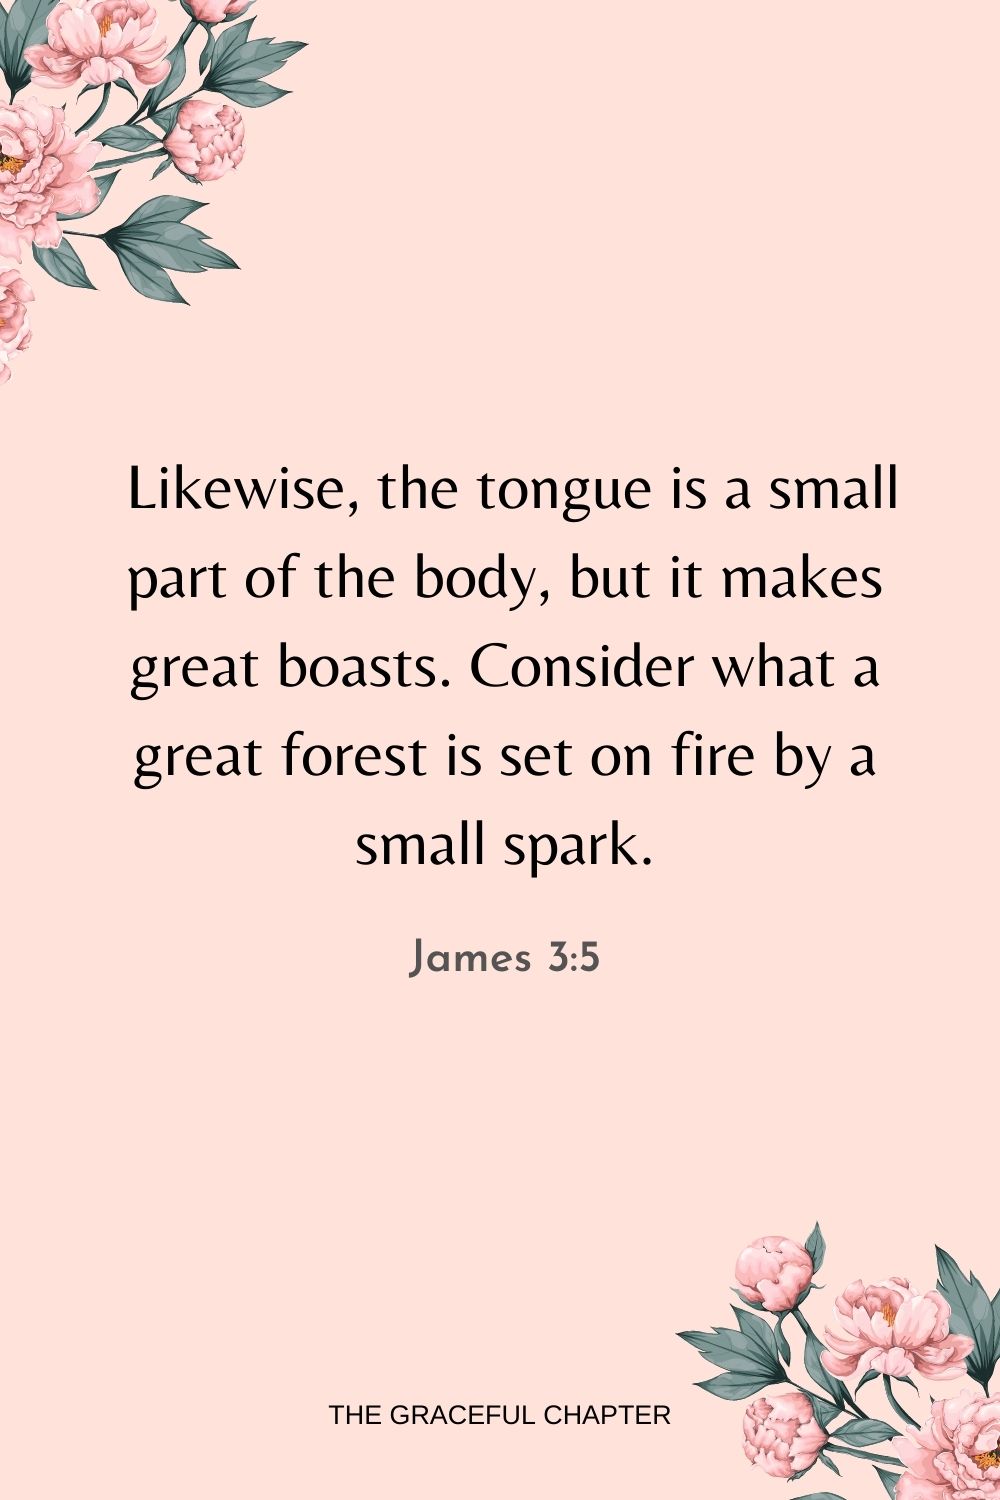  Likewise, the tongue is a small part of the body, but it makes great boasts. Consider what a great forest is set on fire by a small spark. James 3:5